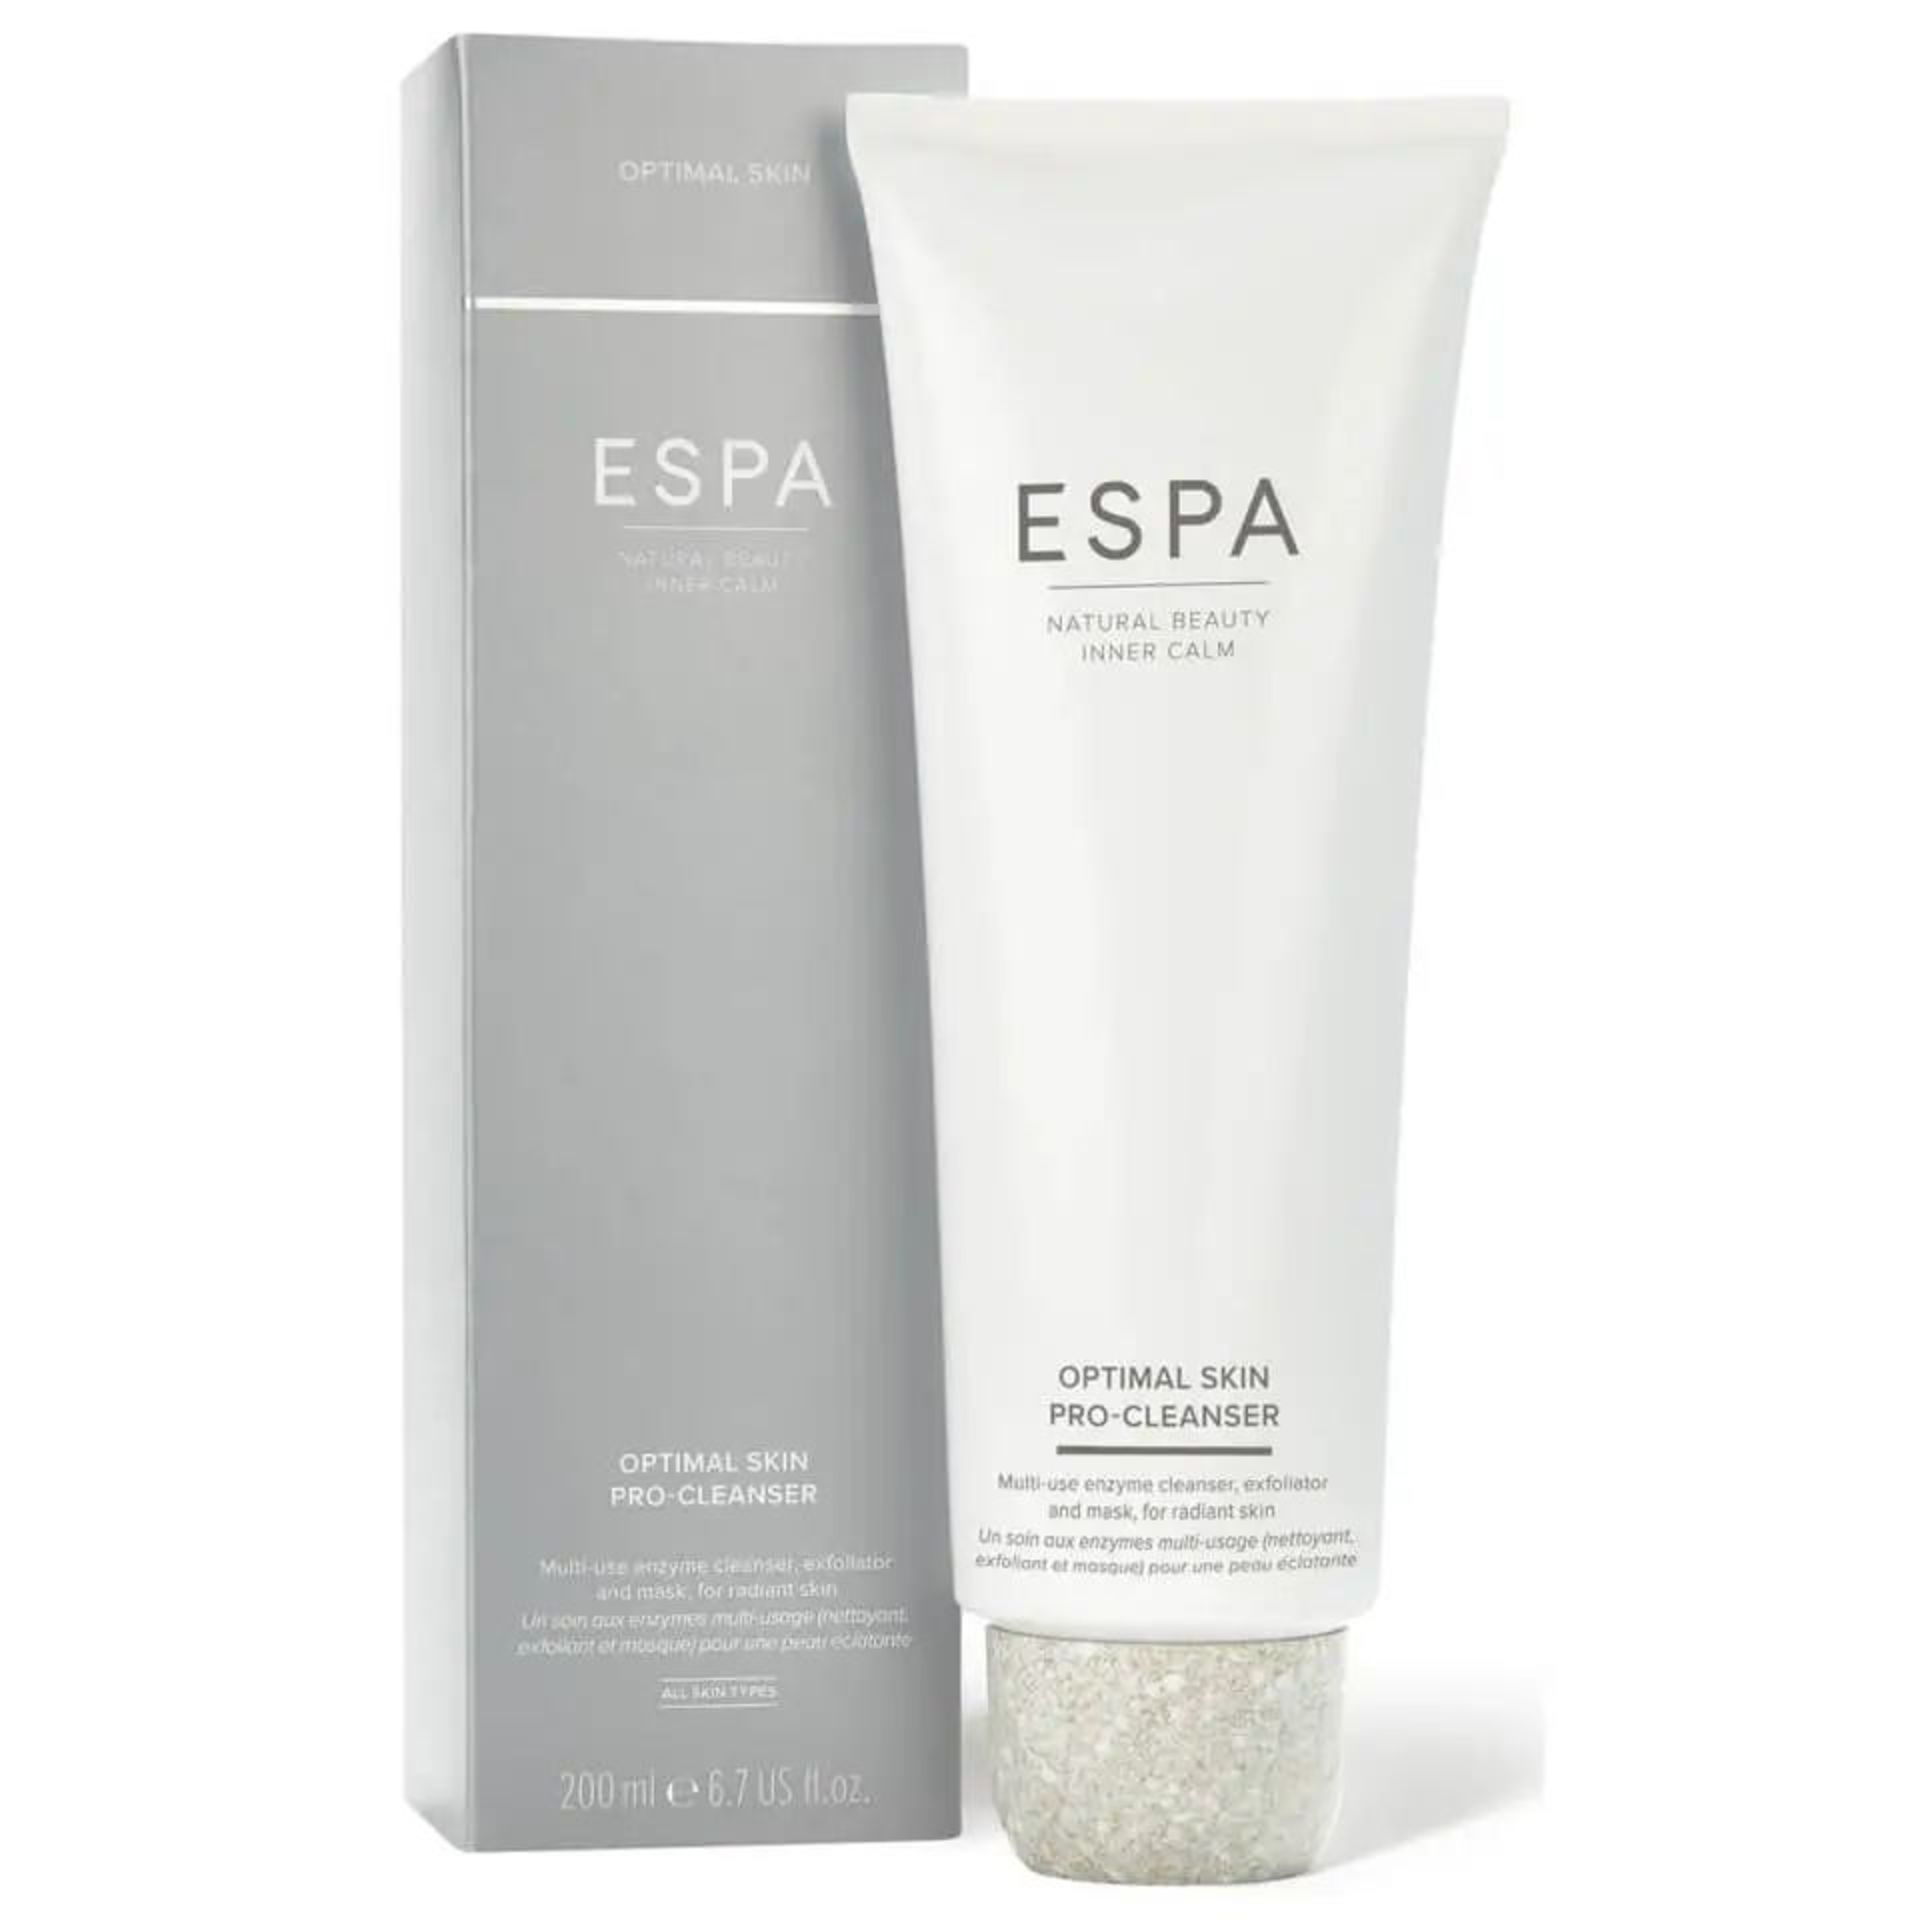 TRADE LOT TO CONTAIN 30x NEW & BOXED ESPA Optimal Skin Pro-Cleanser 100ml. RRP £32 Each. (EBR).